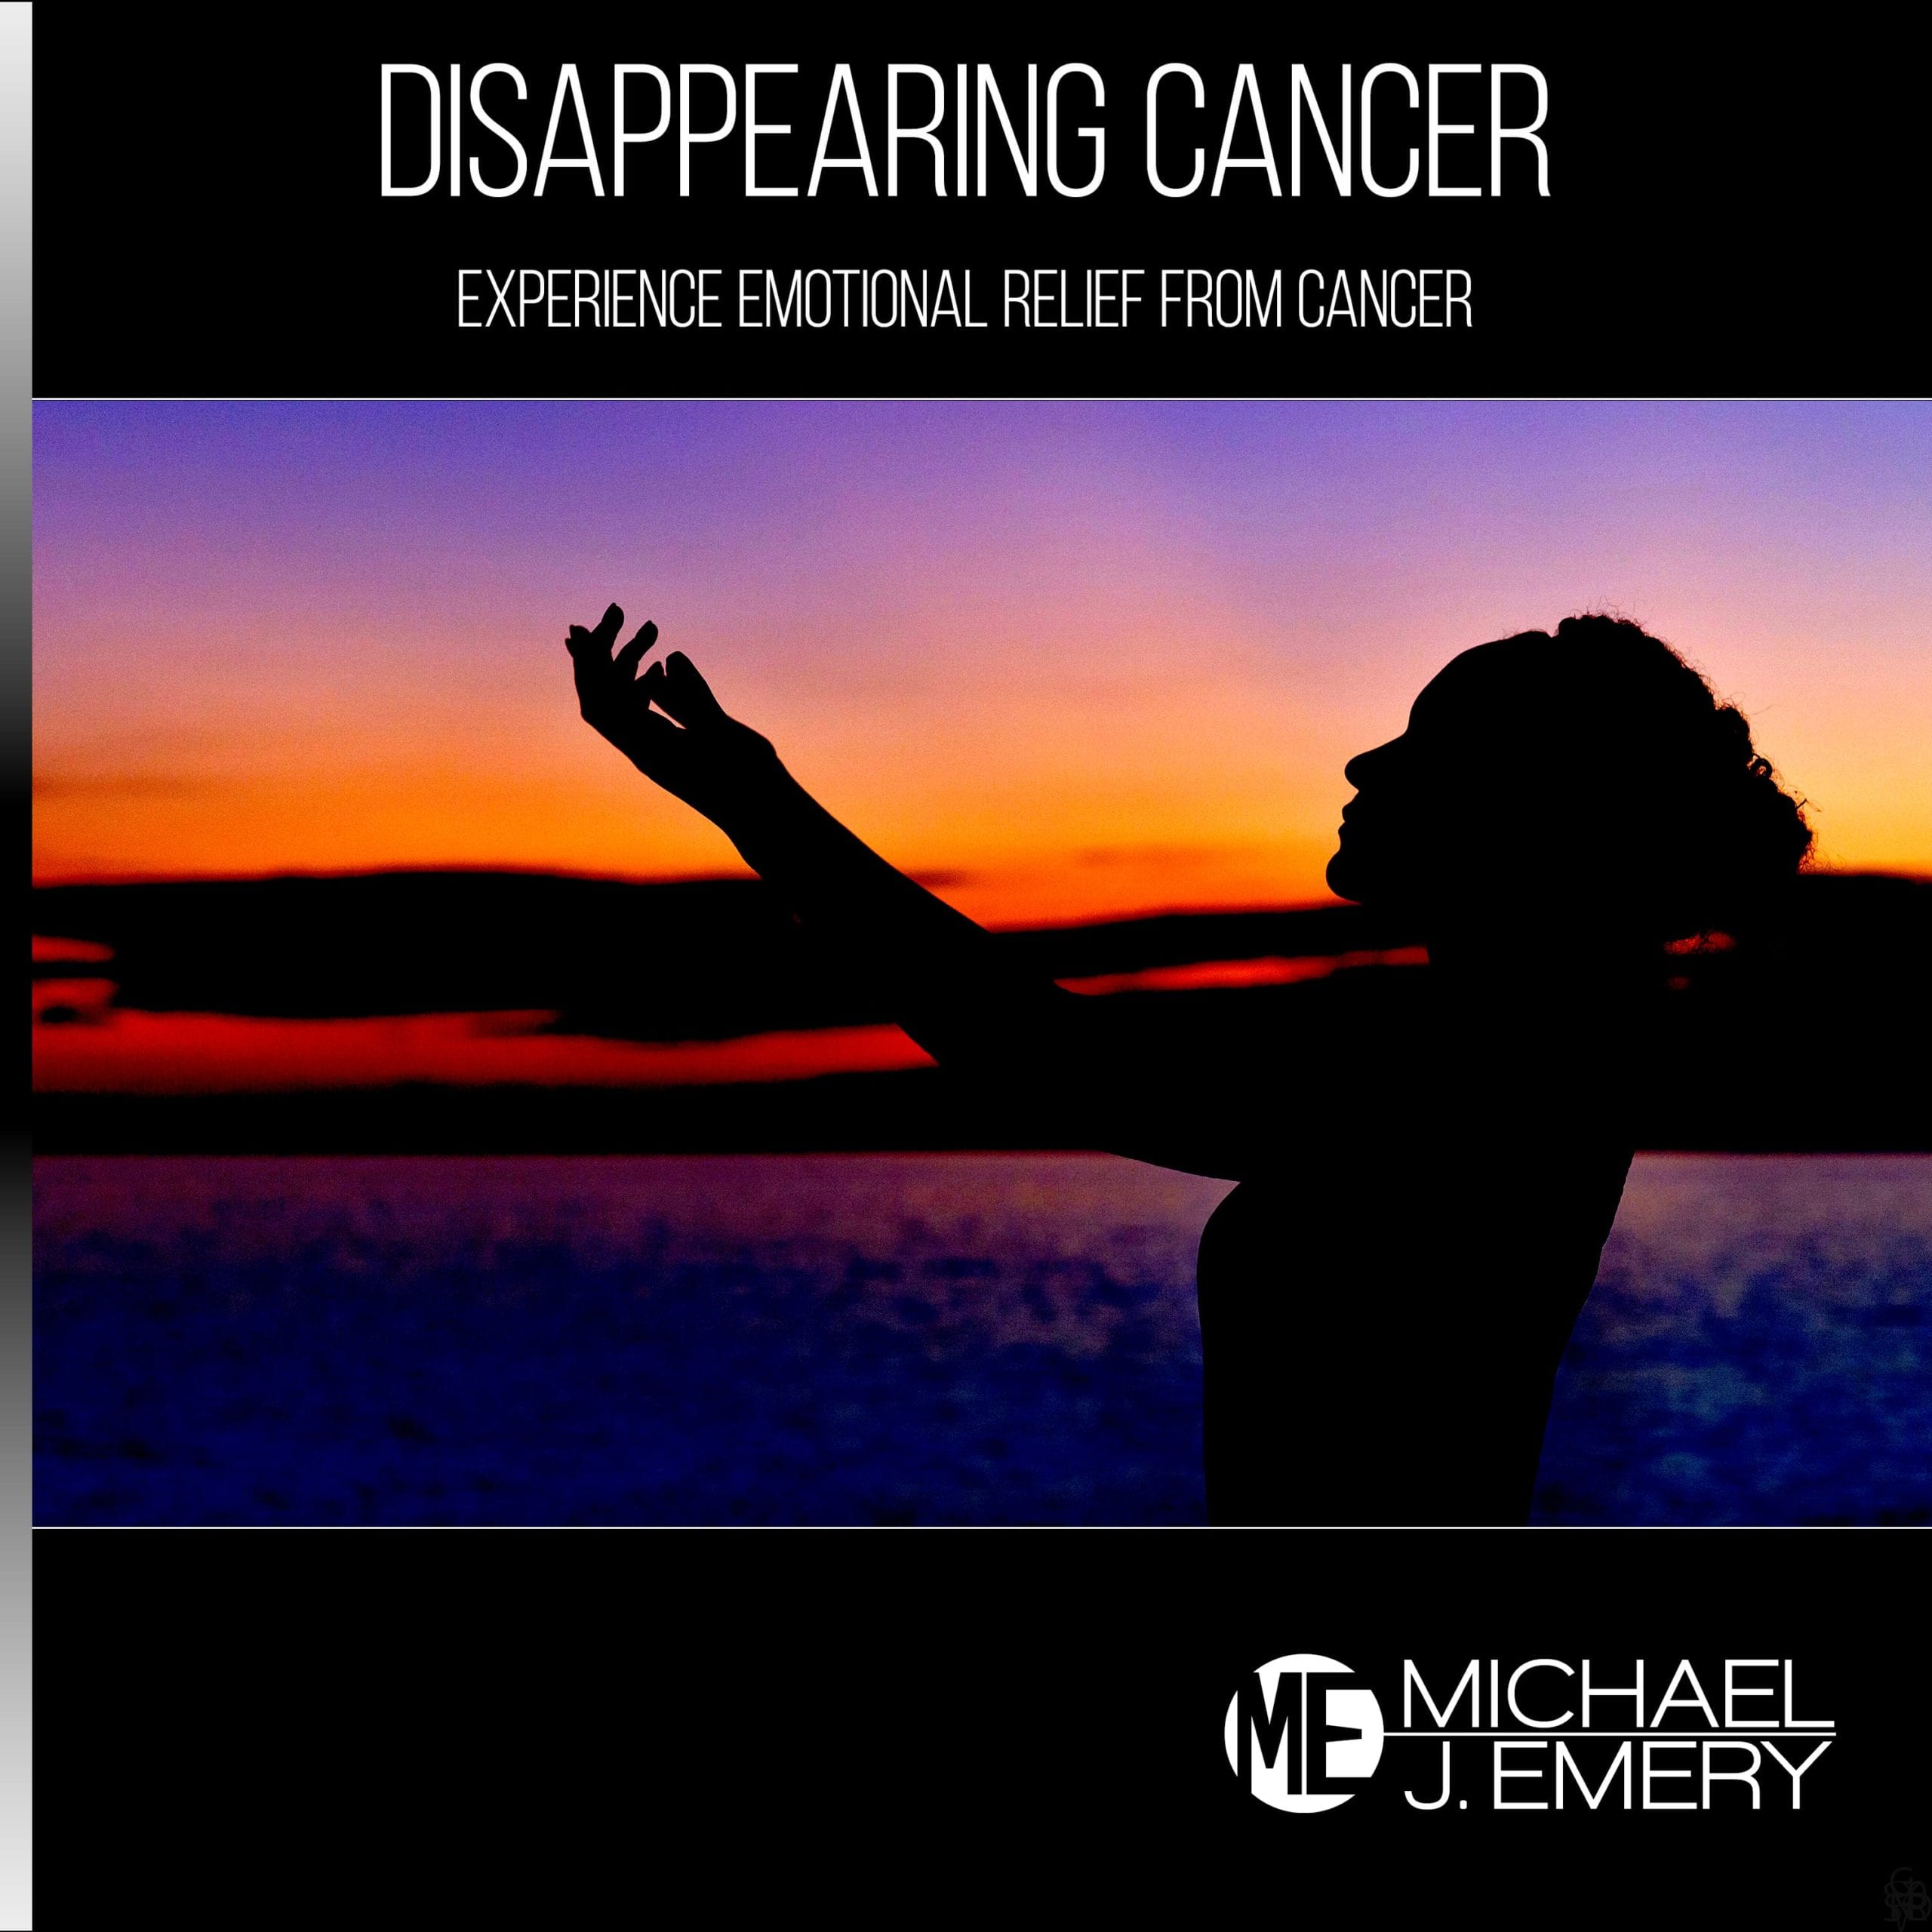 Disappearing-Cancer